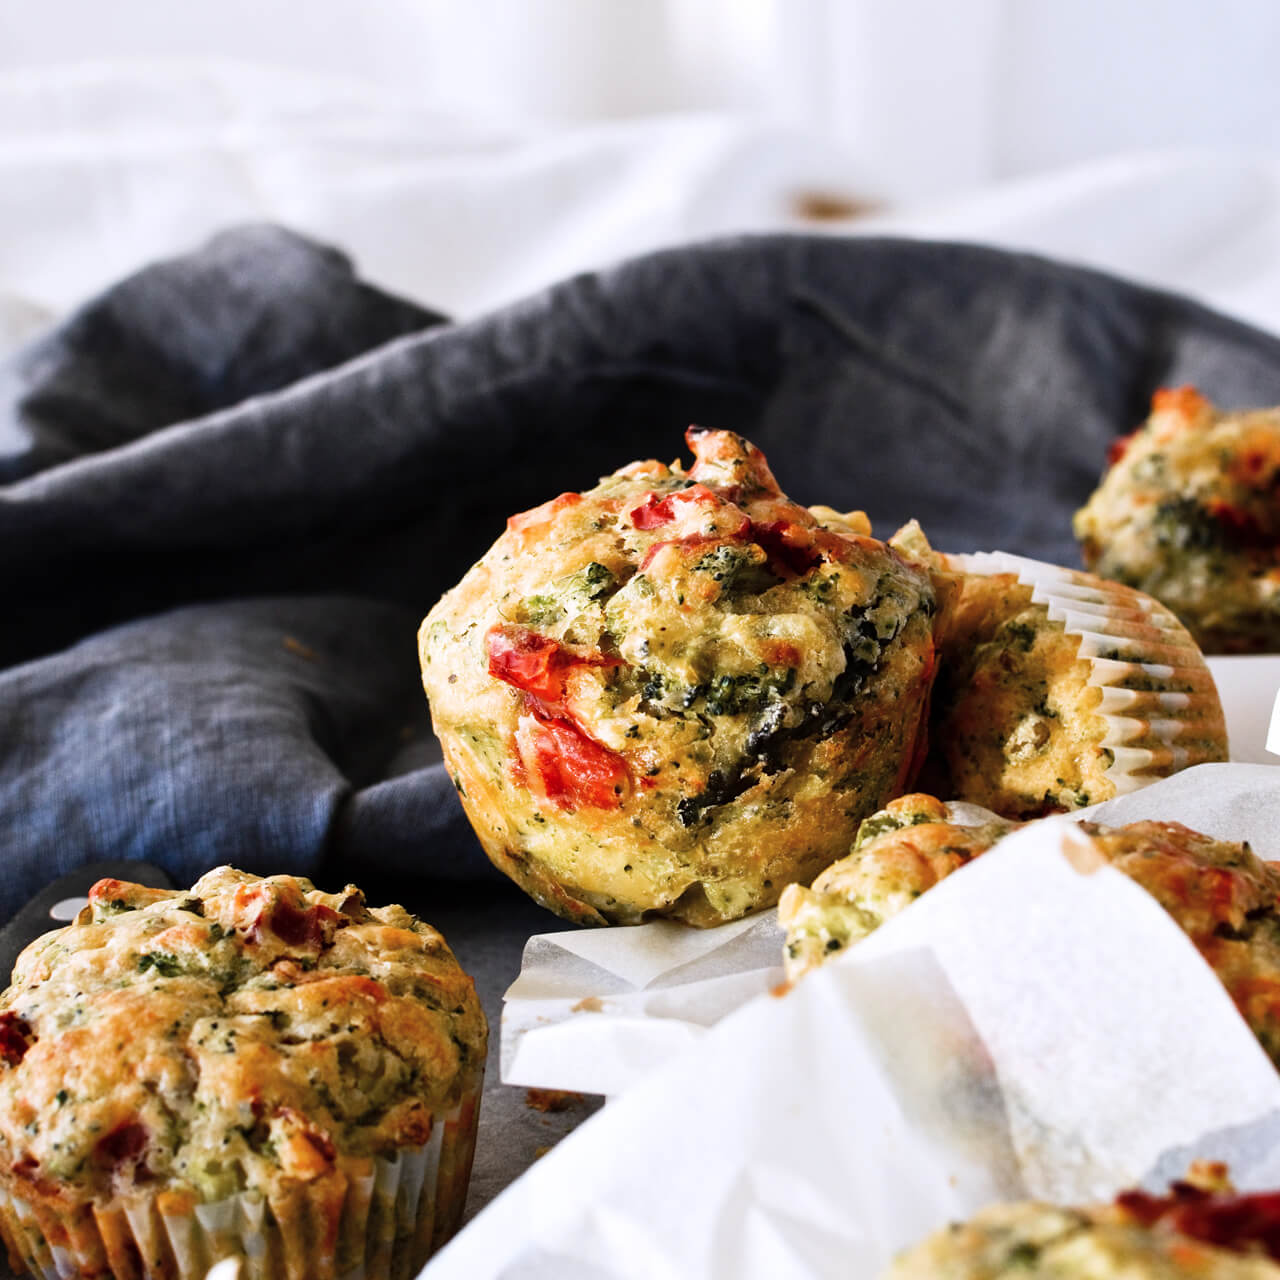 Olive oil broccoli muffins with cabbage and sun-dried tomatoes make the perfect breakfast on the go, or a side to your lunch salad or dinner meal. Great for kids too!